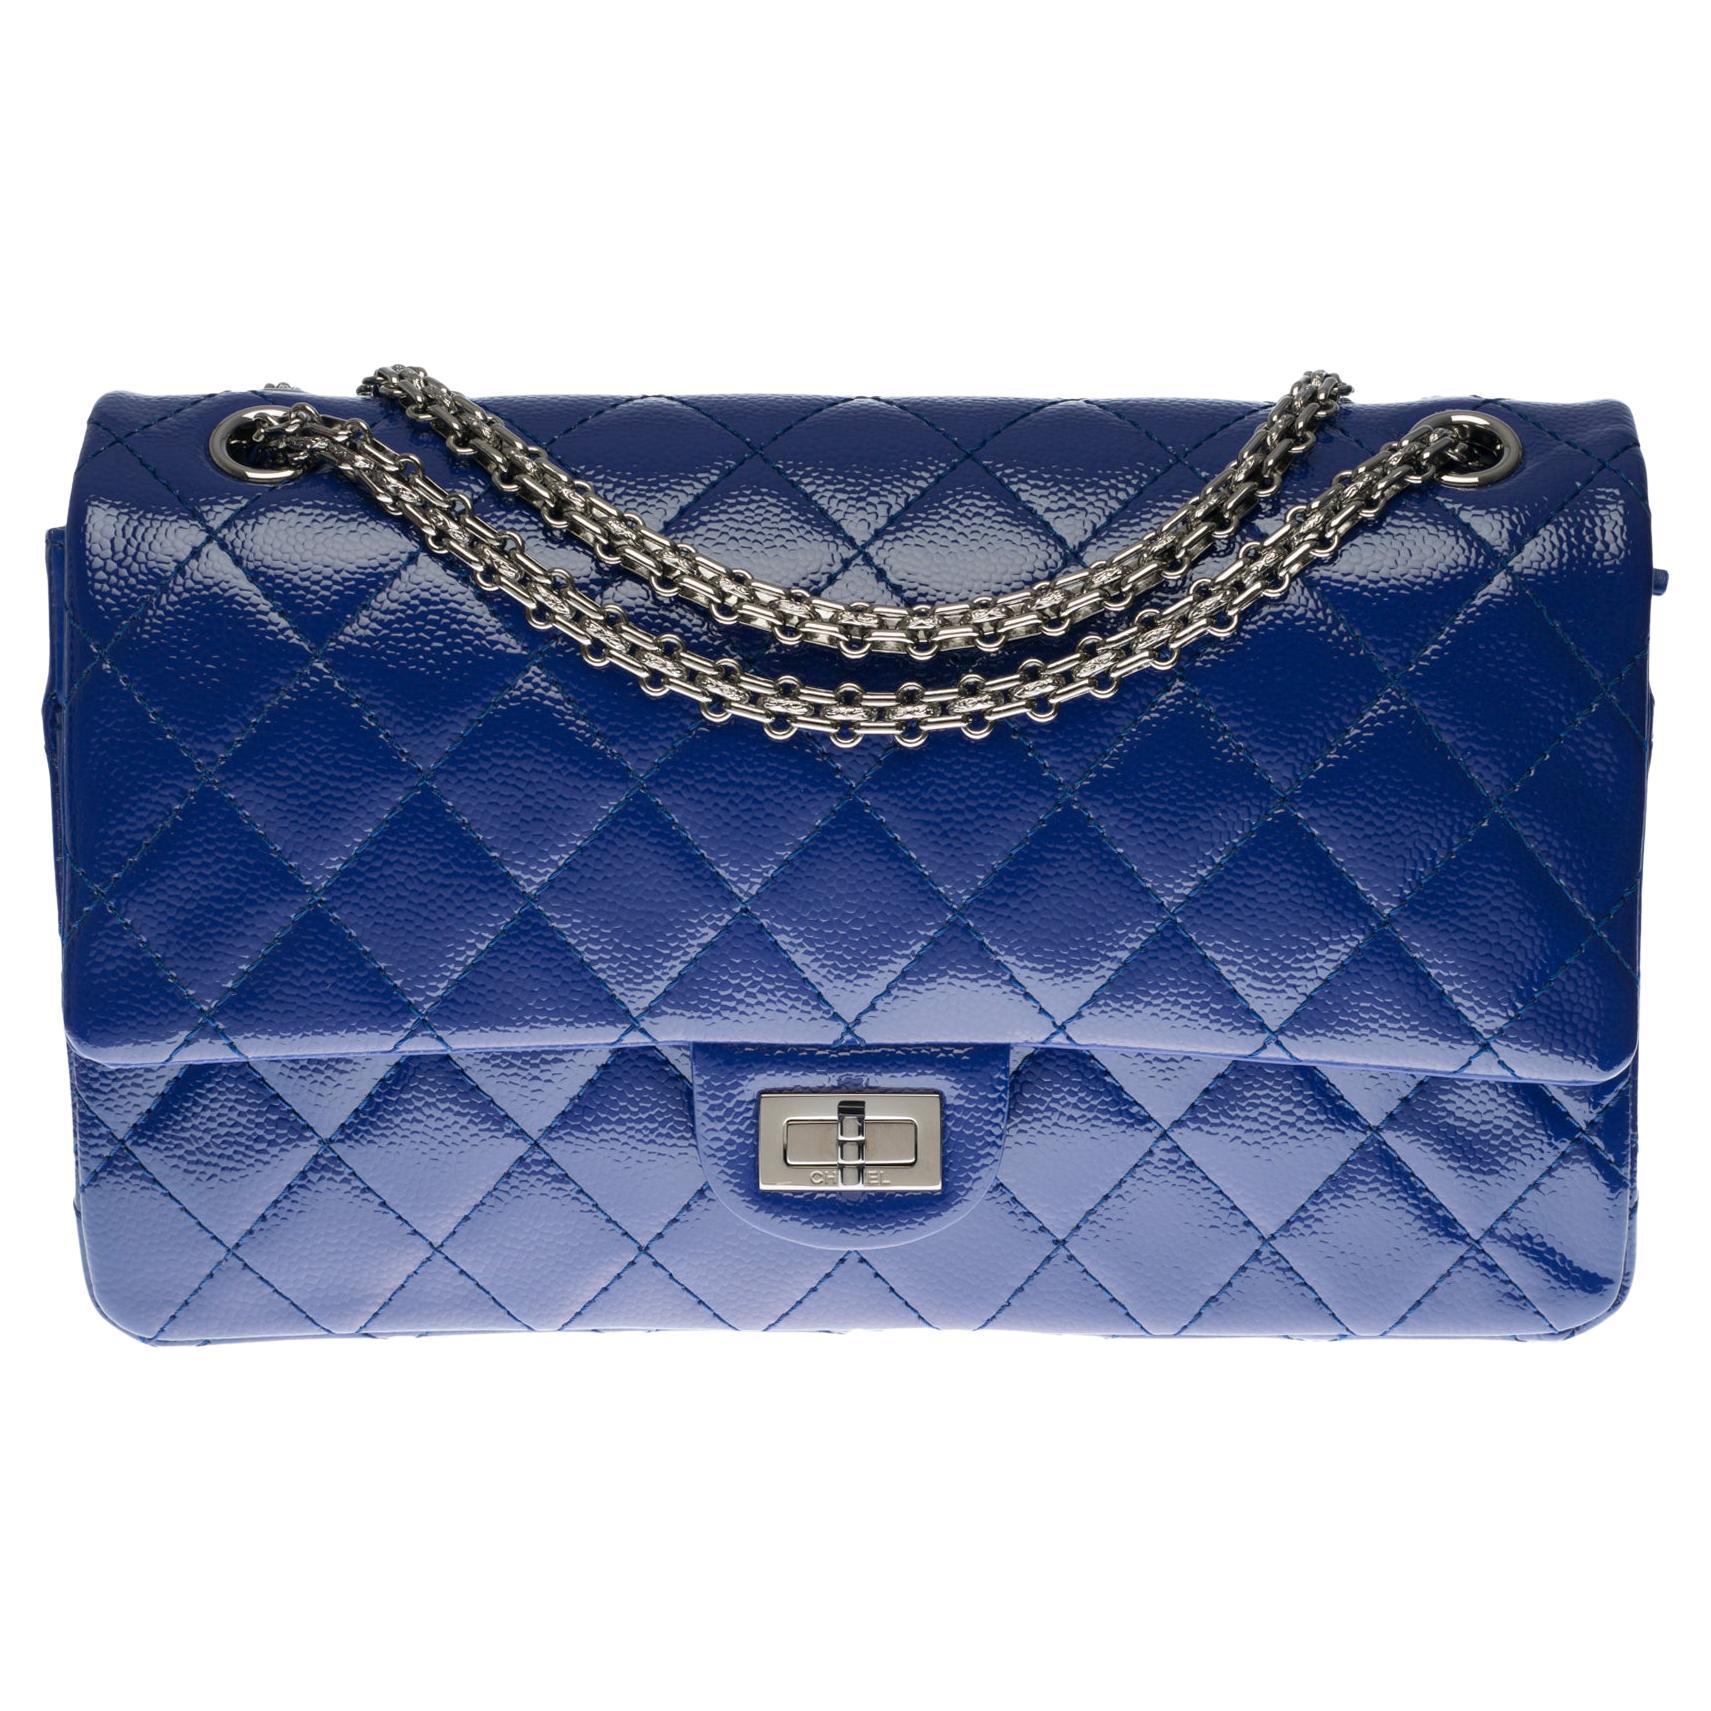 Chanel Classic 2.55 shoulder bag in electric blue quilted patent leather, SHW